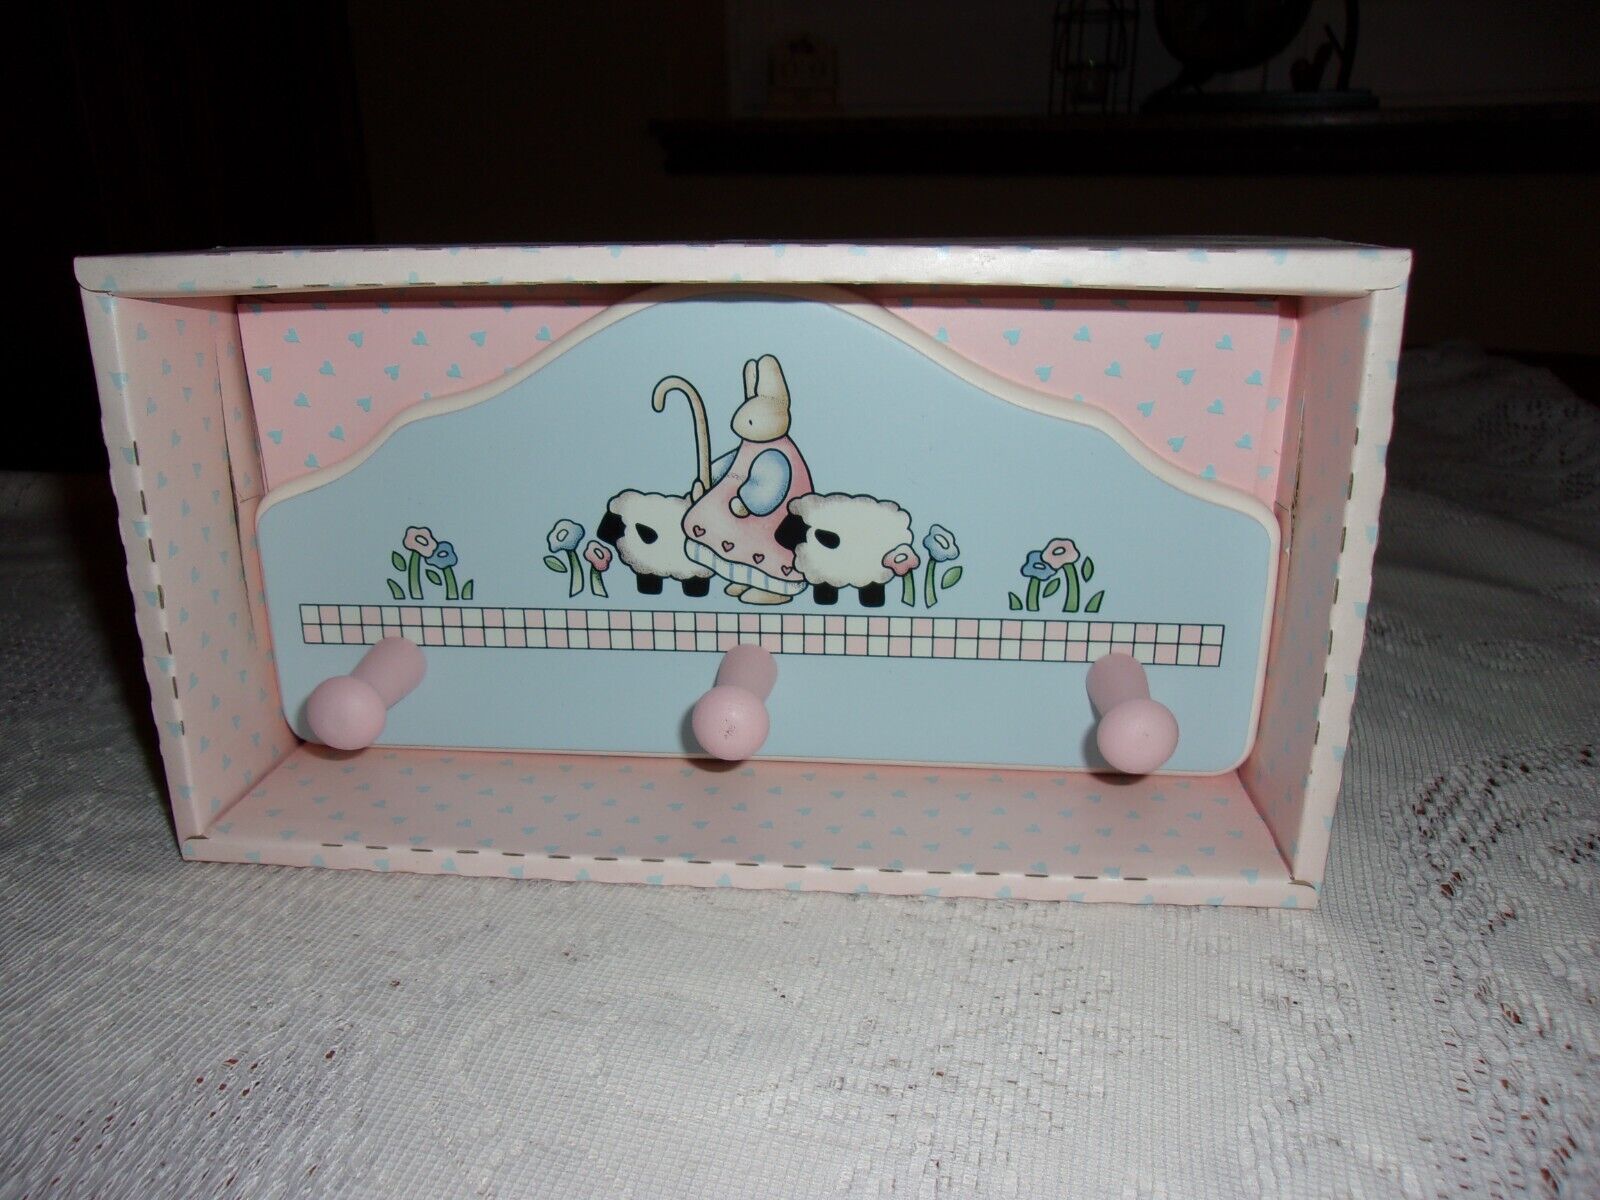 Daisy Kingdom Nursery Wall Hanger With Knobs- Vintage- Baby- Gender Neutral